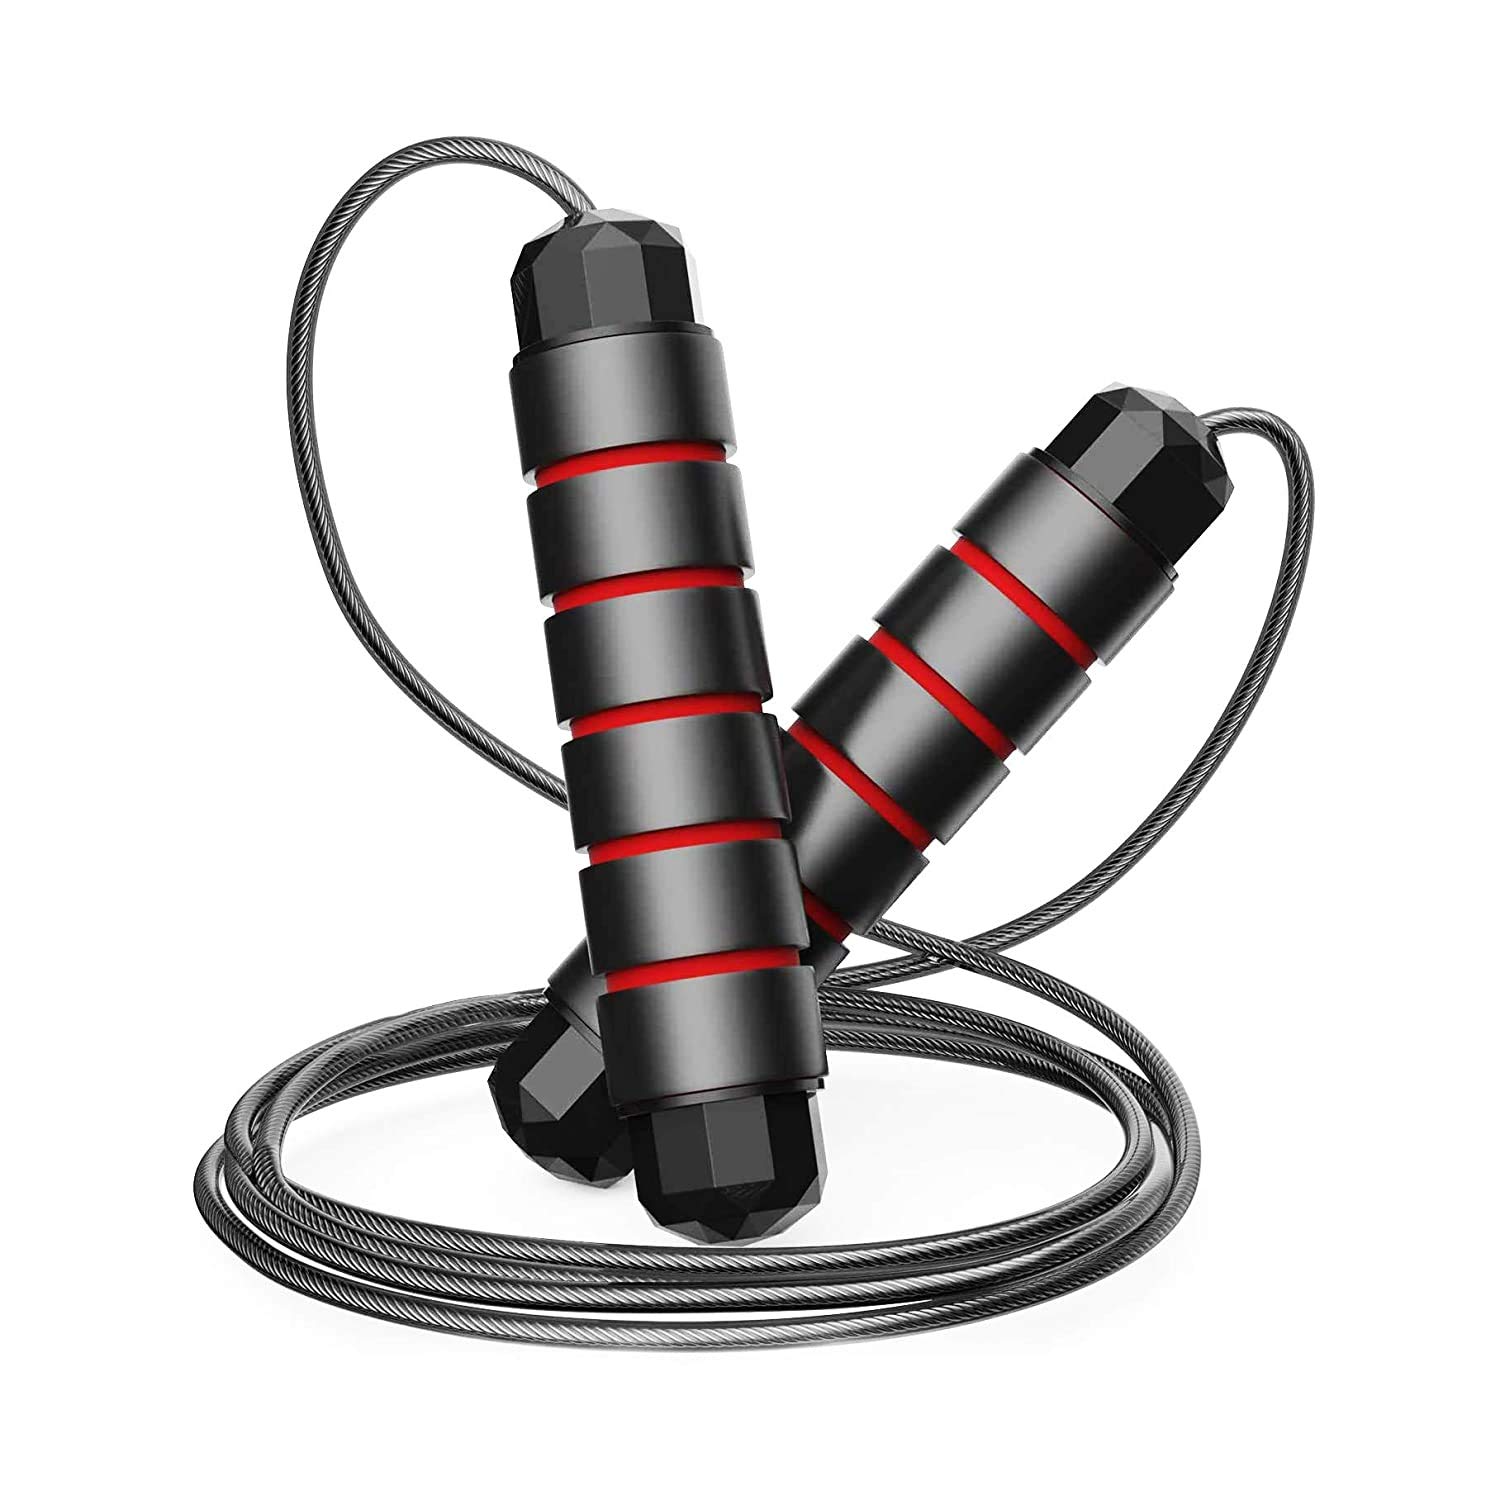 Fashionnix jump rope for men, women and kids